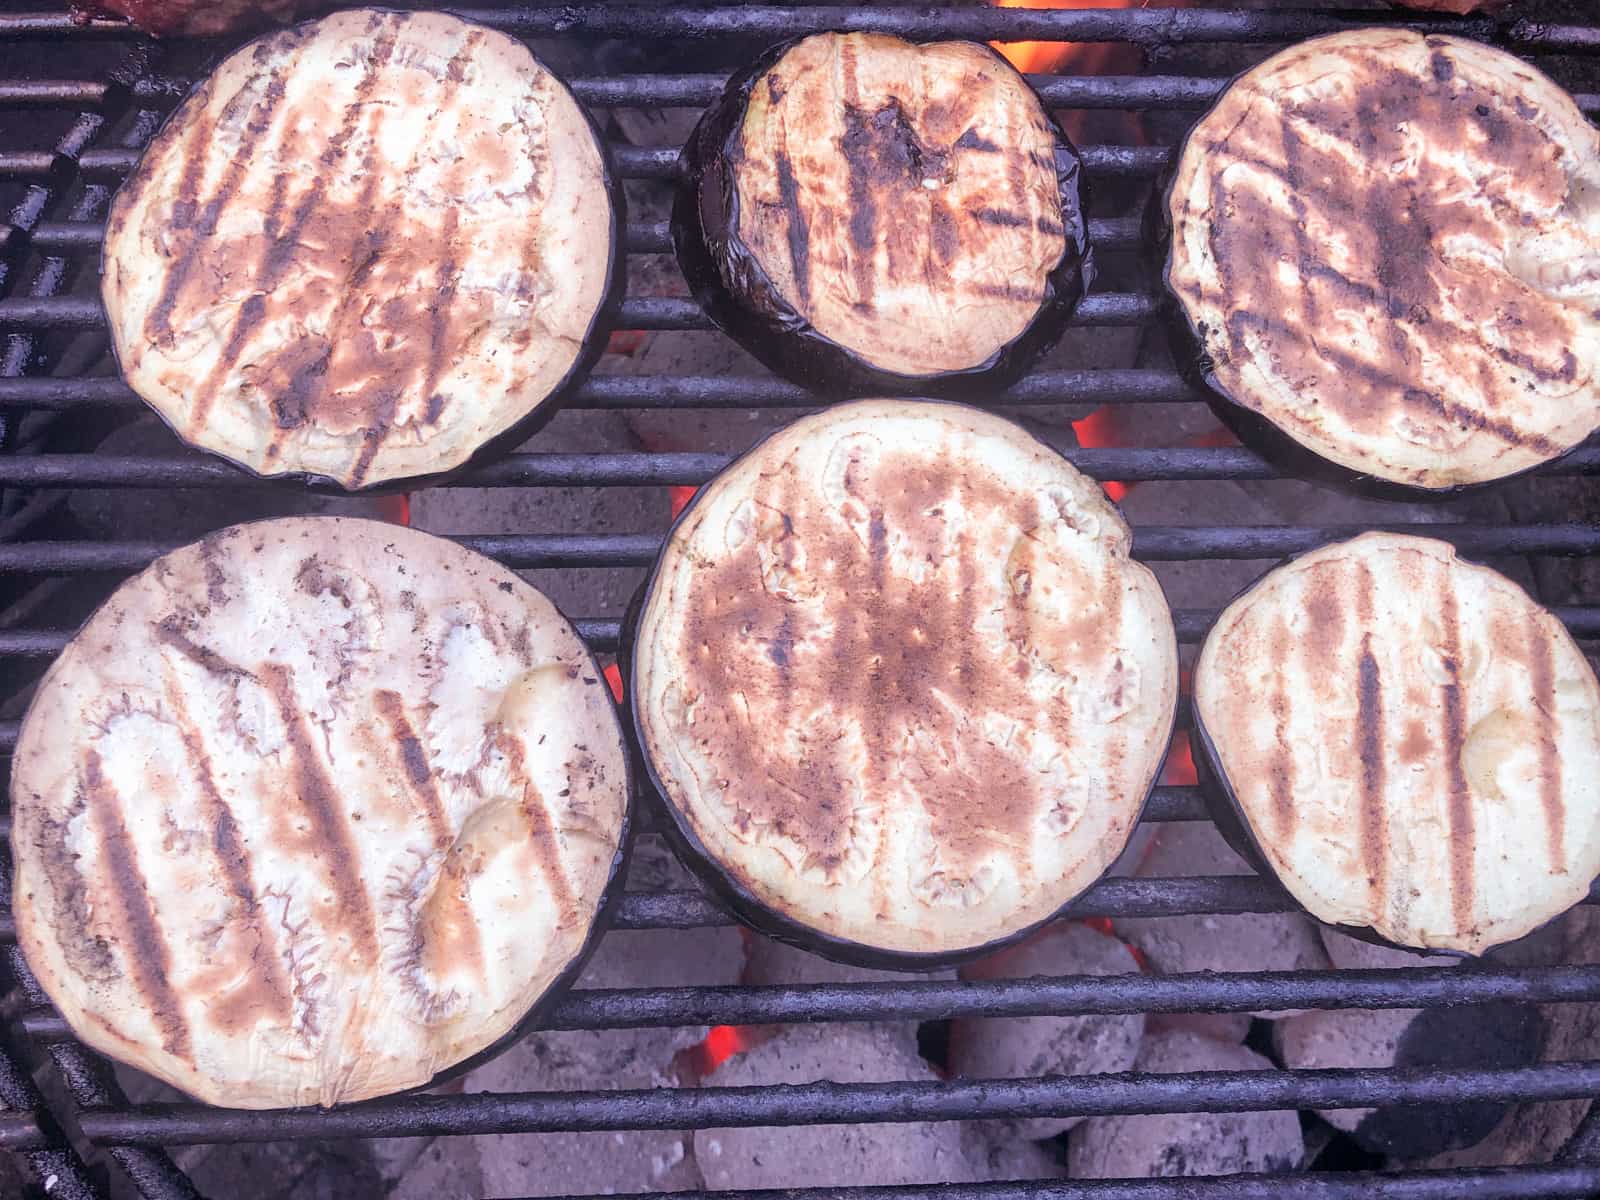 Sliced aubergines (eggplant) on a charcoal bbq grilling.